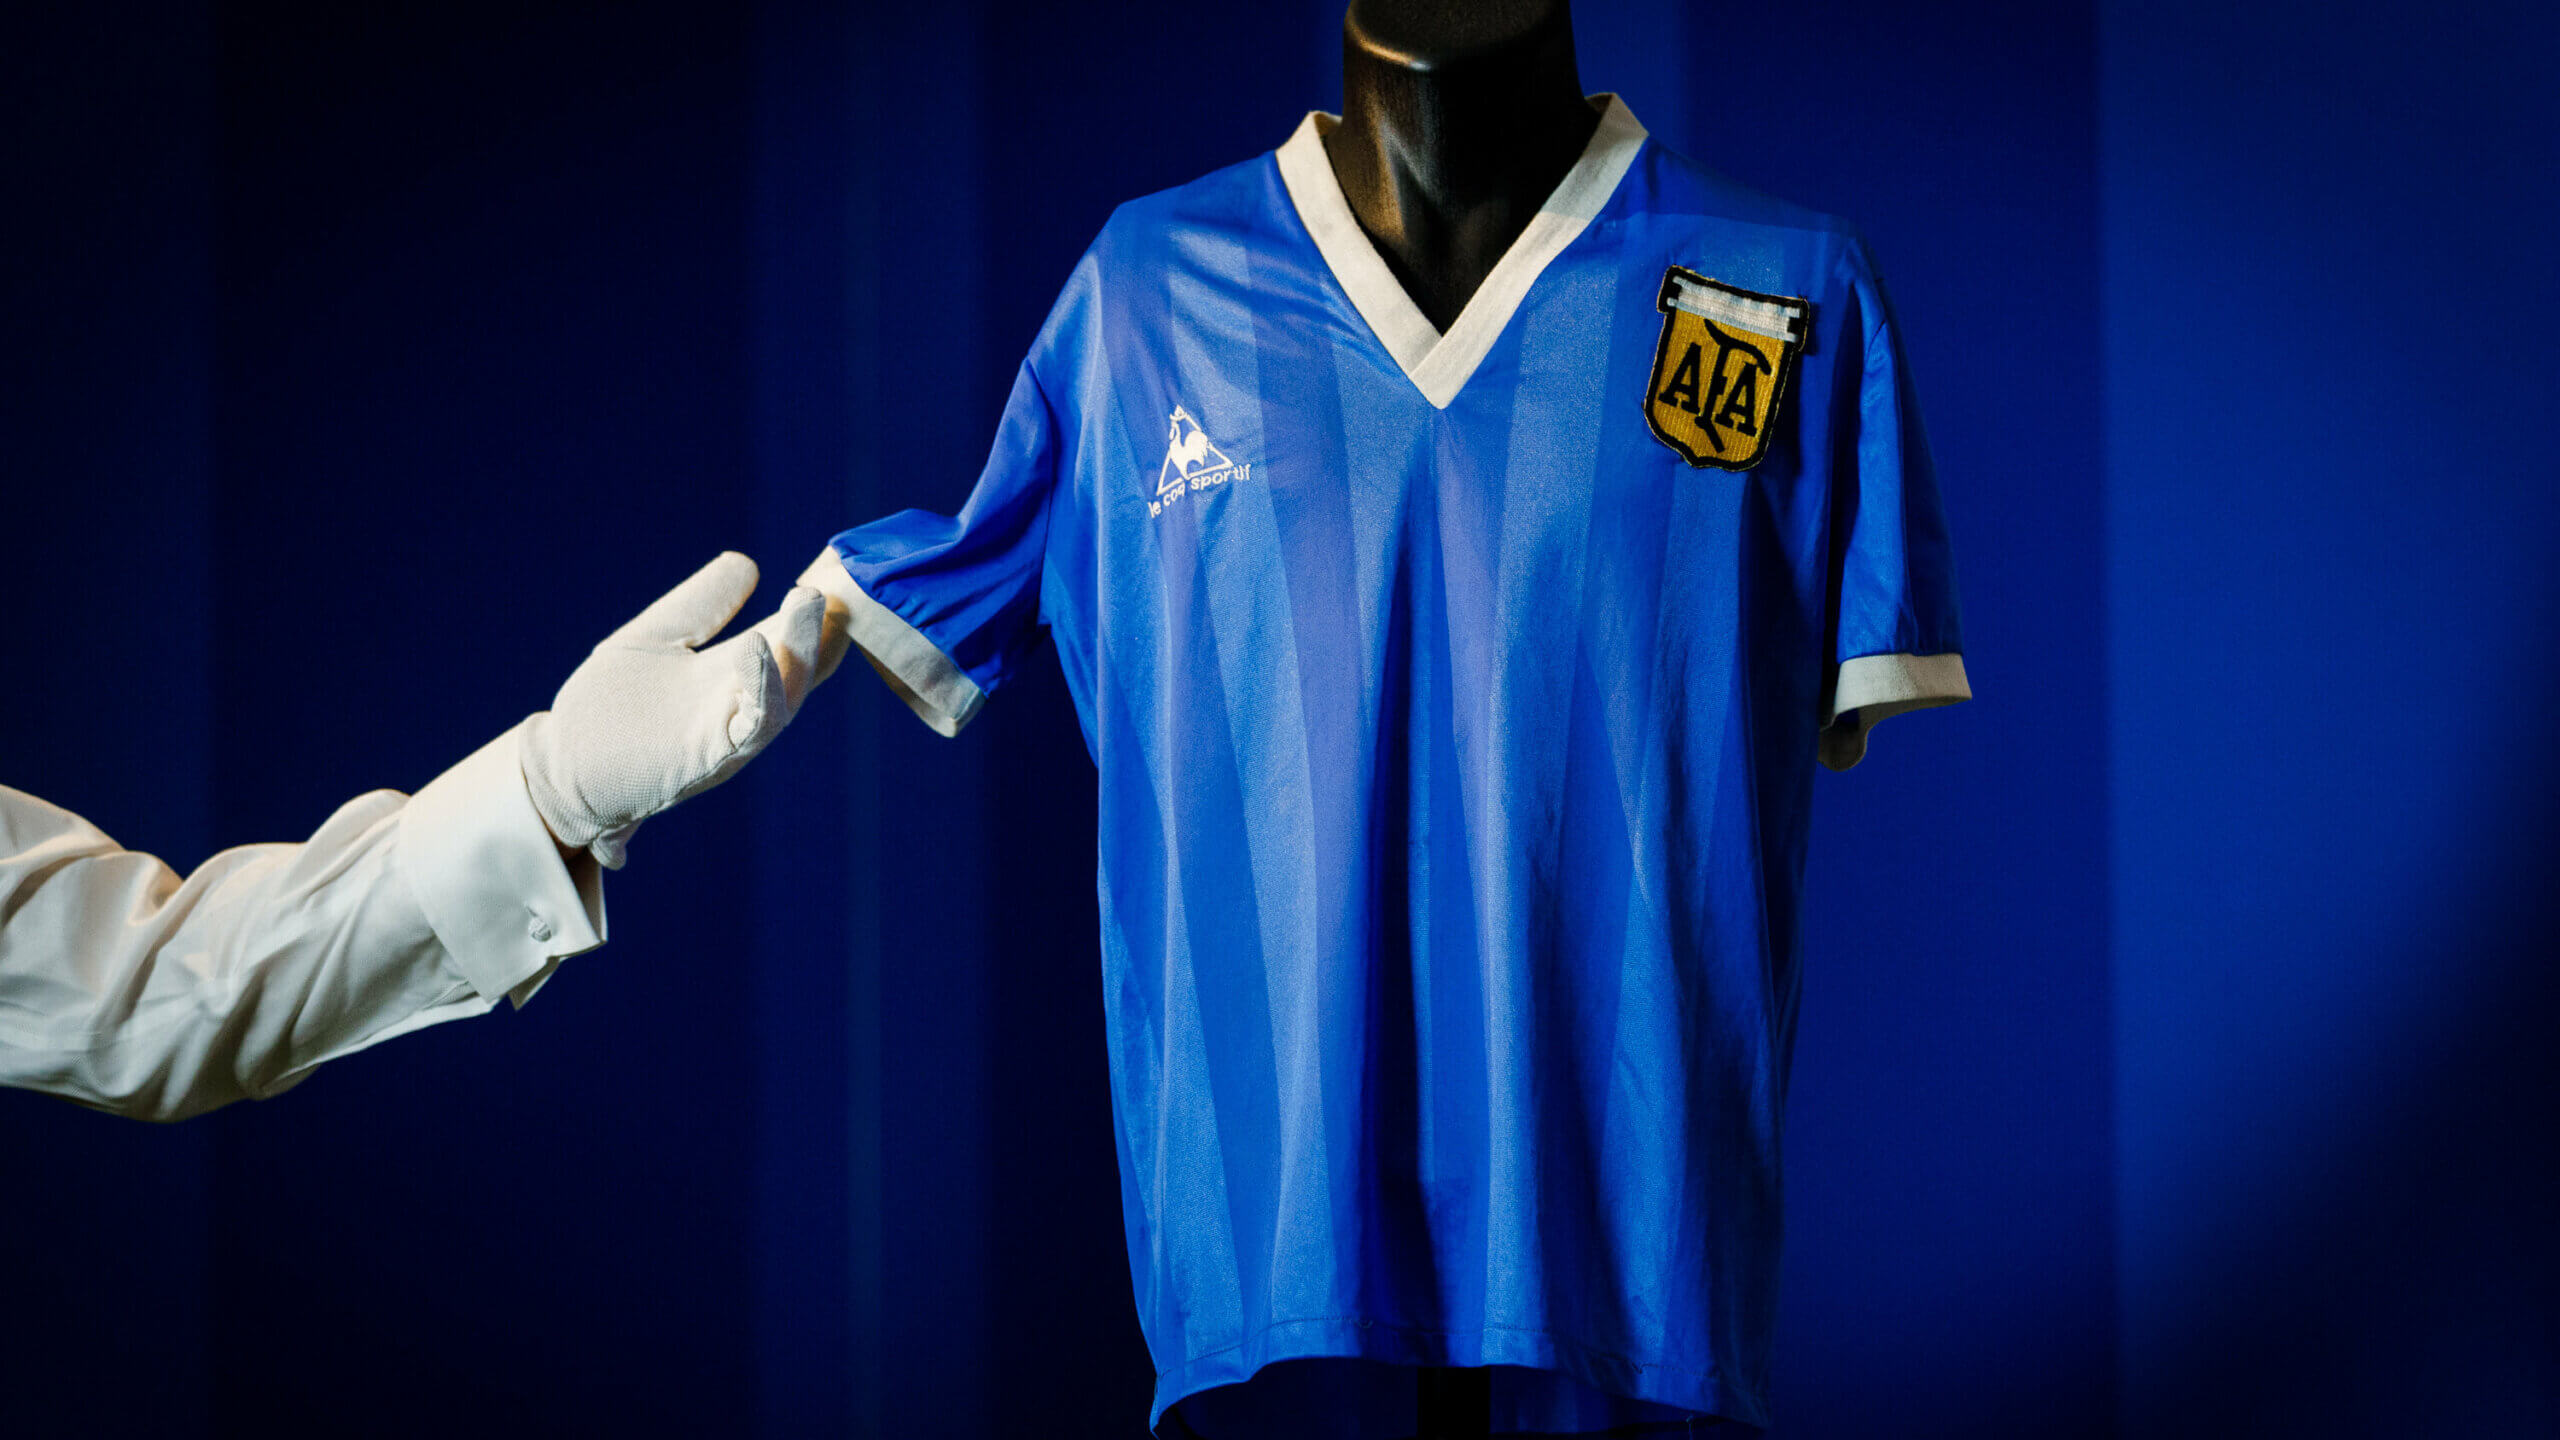 Argentina legend Diego Maradona’s ‘Hand of God’ jersey sold for more than $9 million